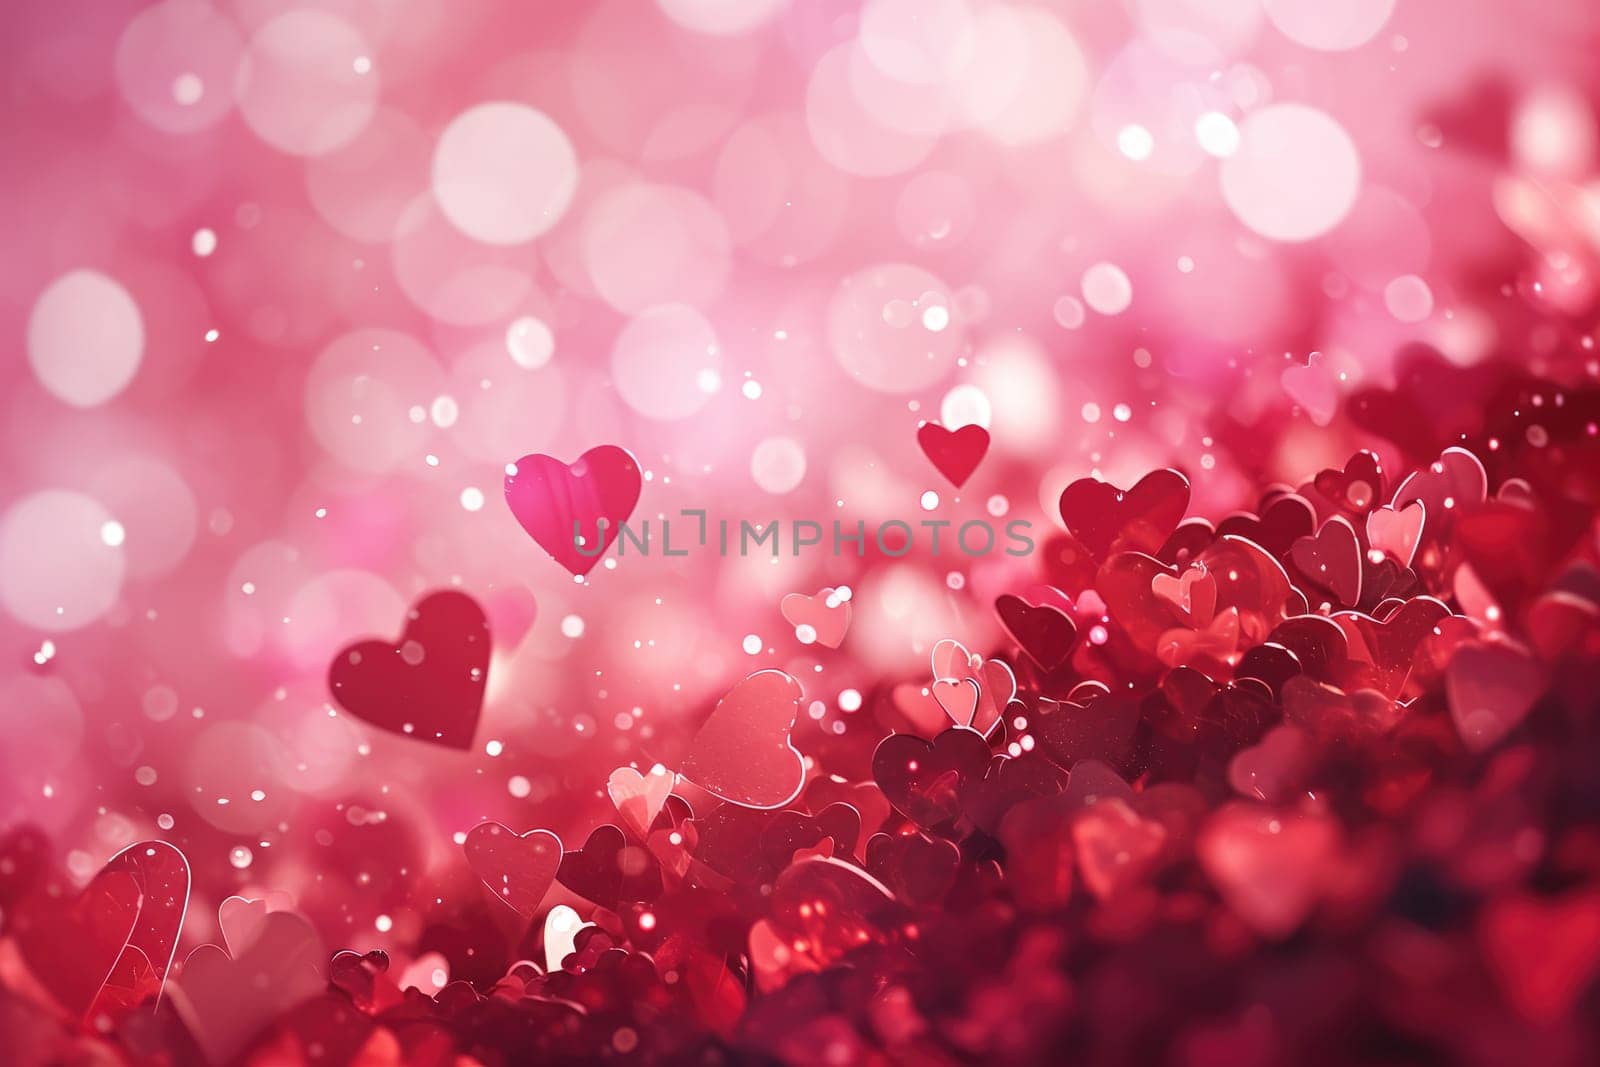 a romantic Valentine's Day background with a blend of soft pink and heart shaped elements.